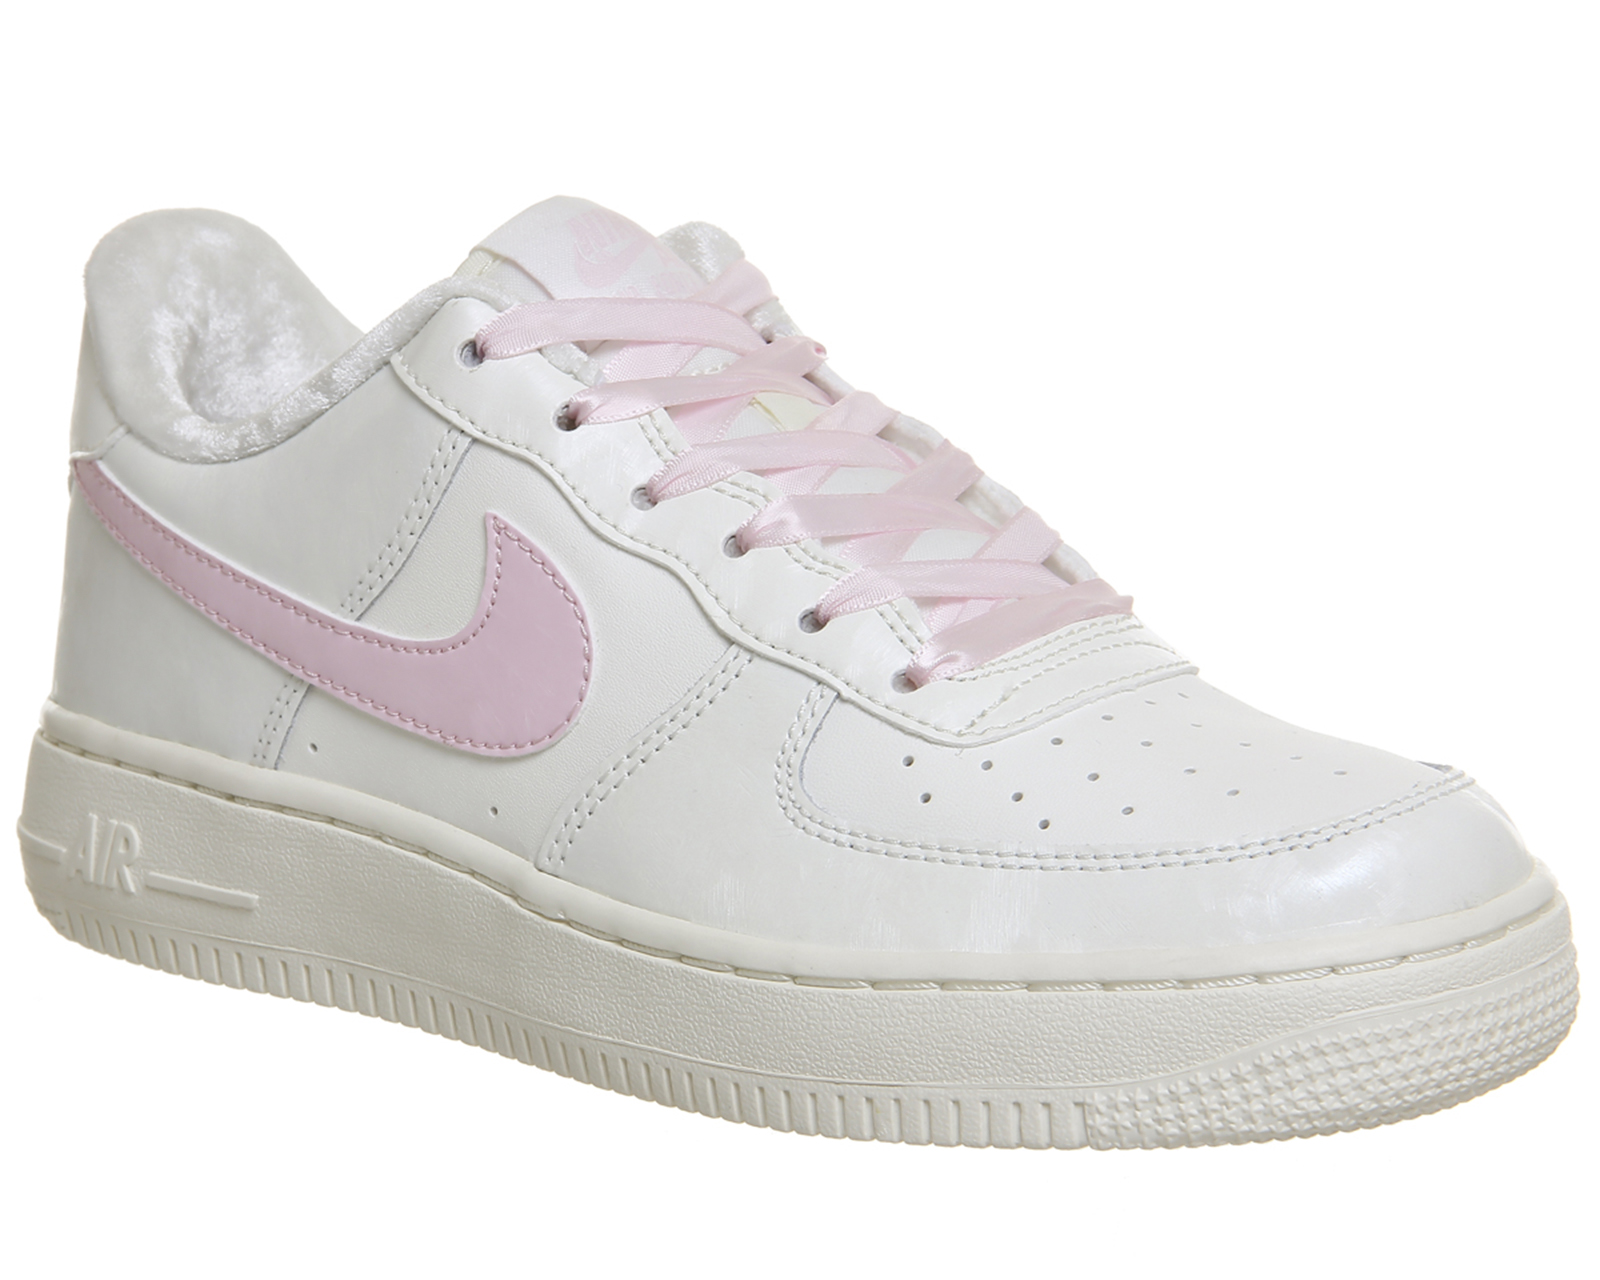 nike white & pink air force 1 trainers junior